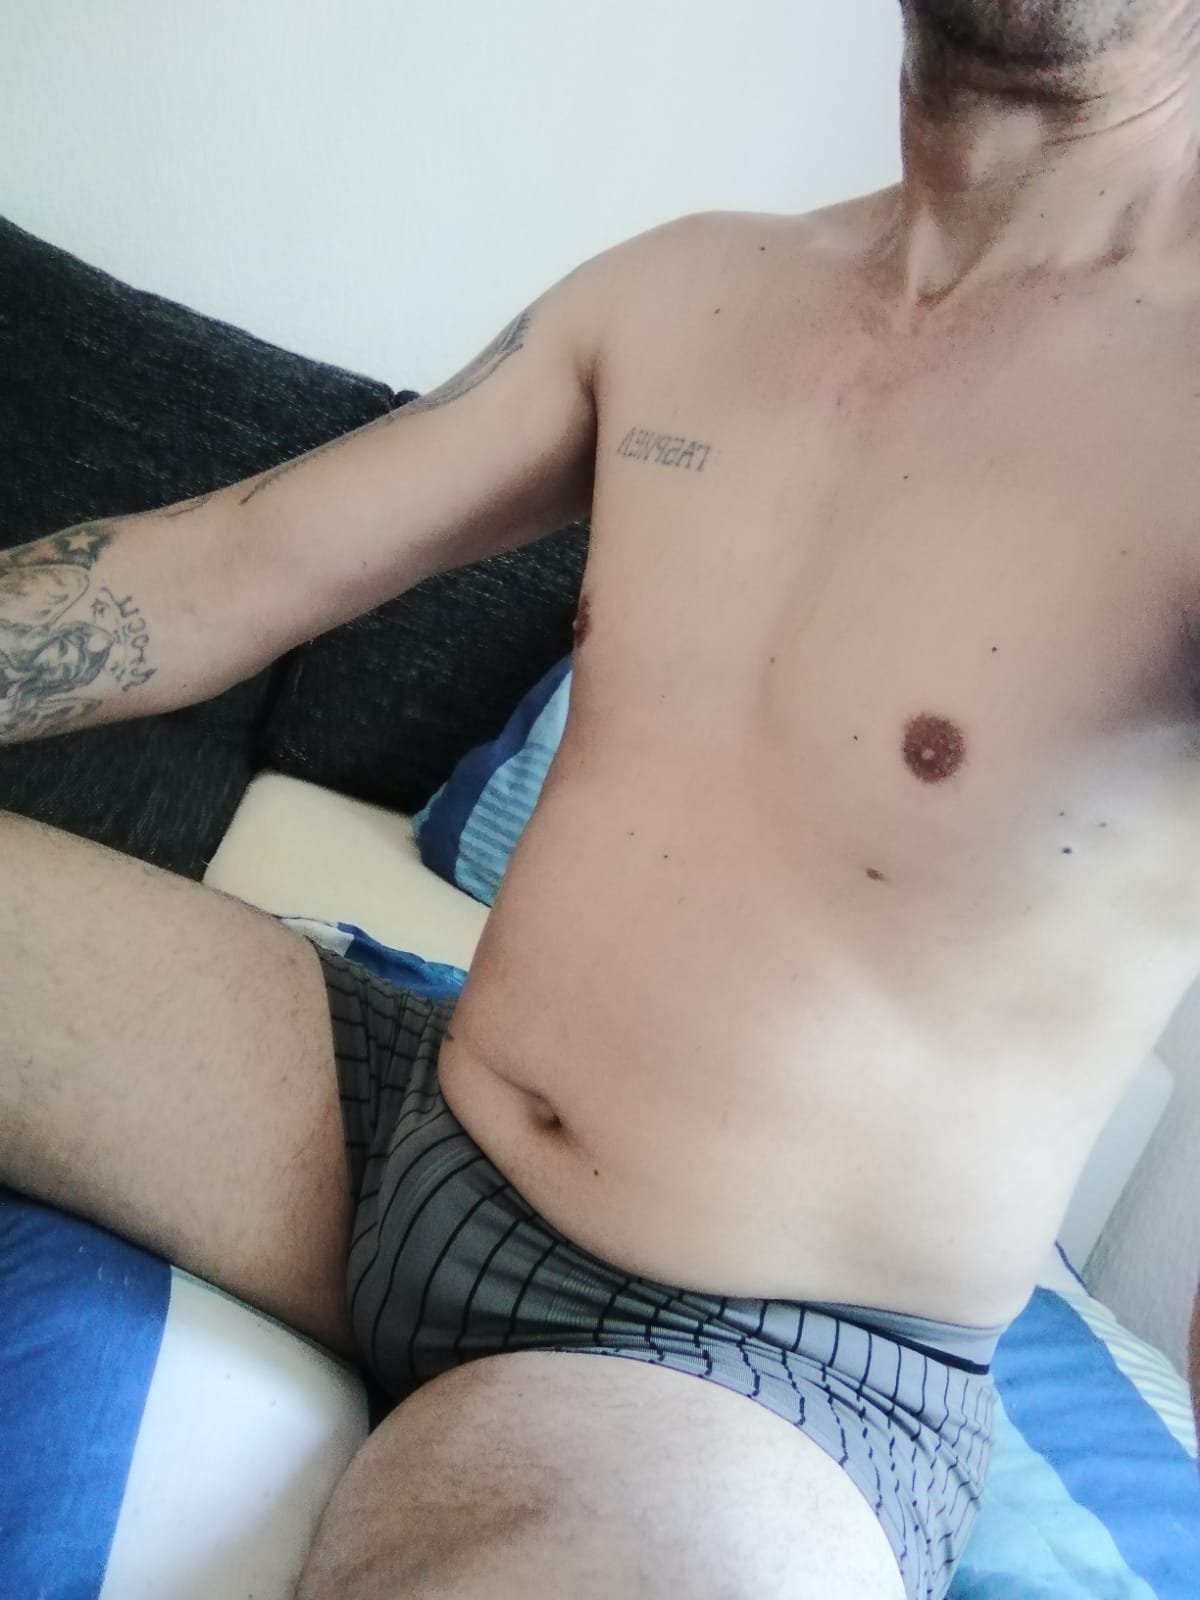 Find Escort Service in Erfurt and Enjoy Time With Pretty Girls - model photo David95